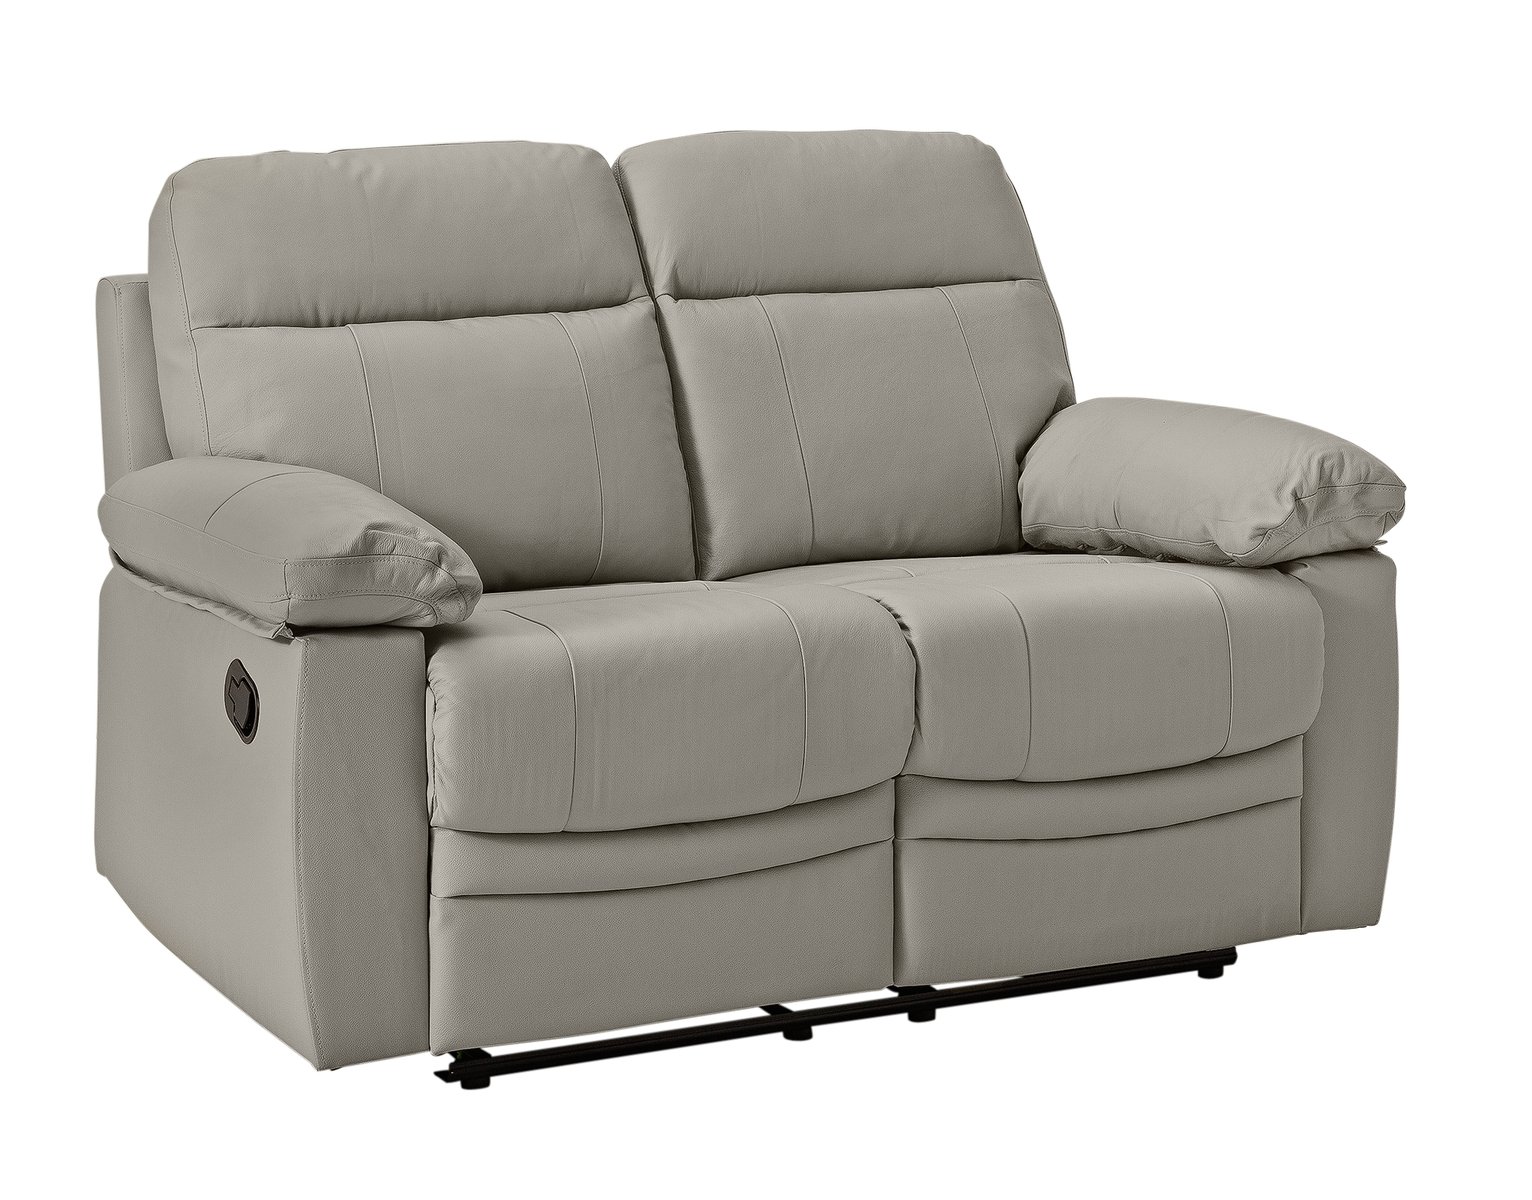 Argos Home New Paolo Pair of 2 Seater Recliner Sofas Reviews